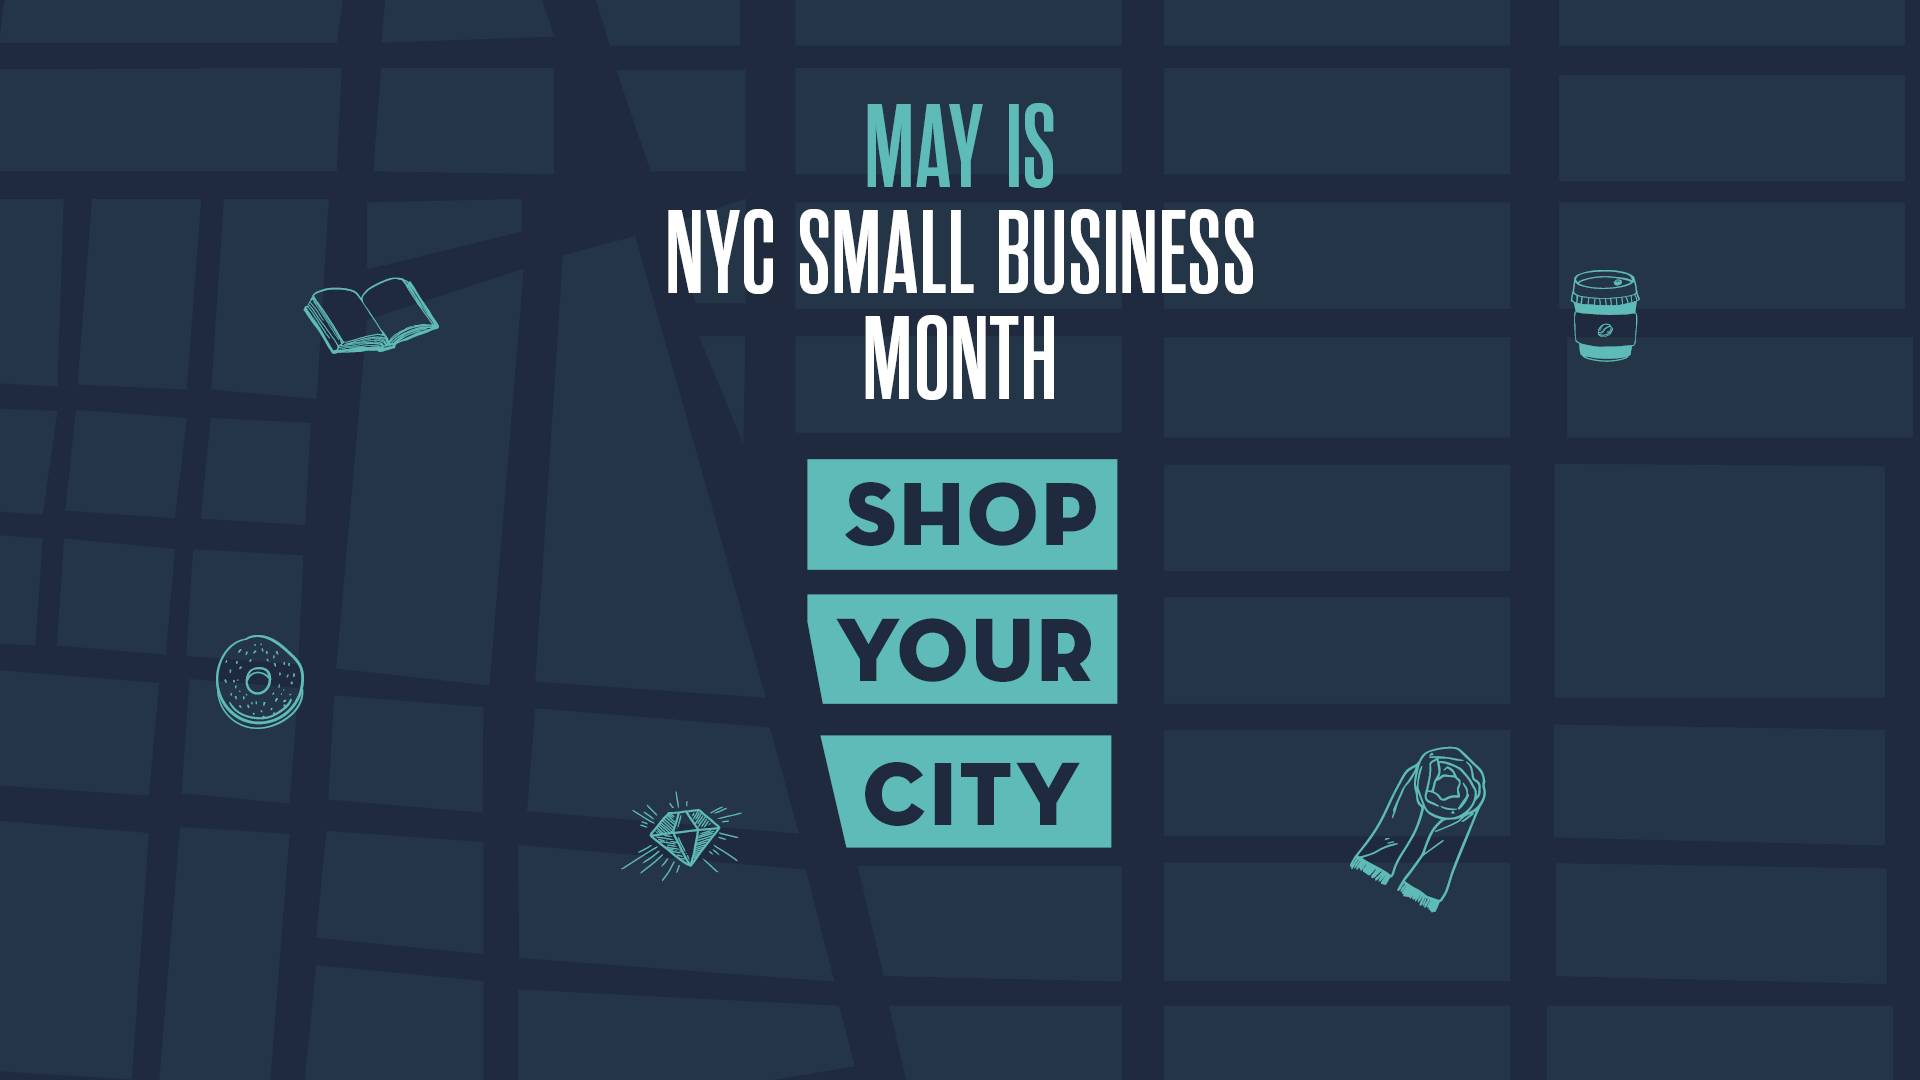 Promotional graphic for Shop Your City campaign with icons of items to purchase and text "May is NYC Small Business Month. Shop Your City"